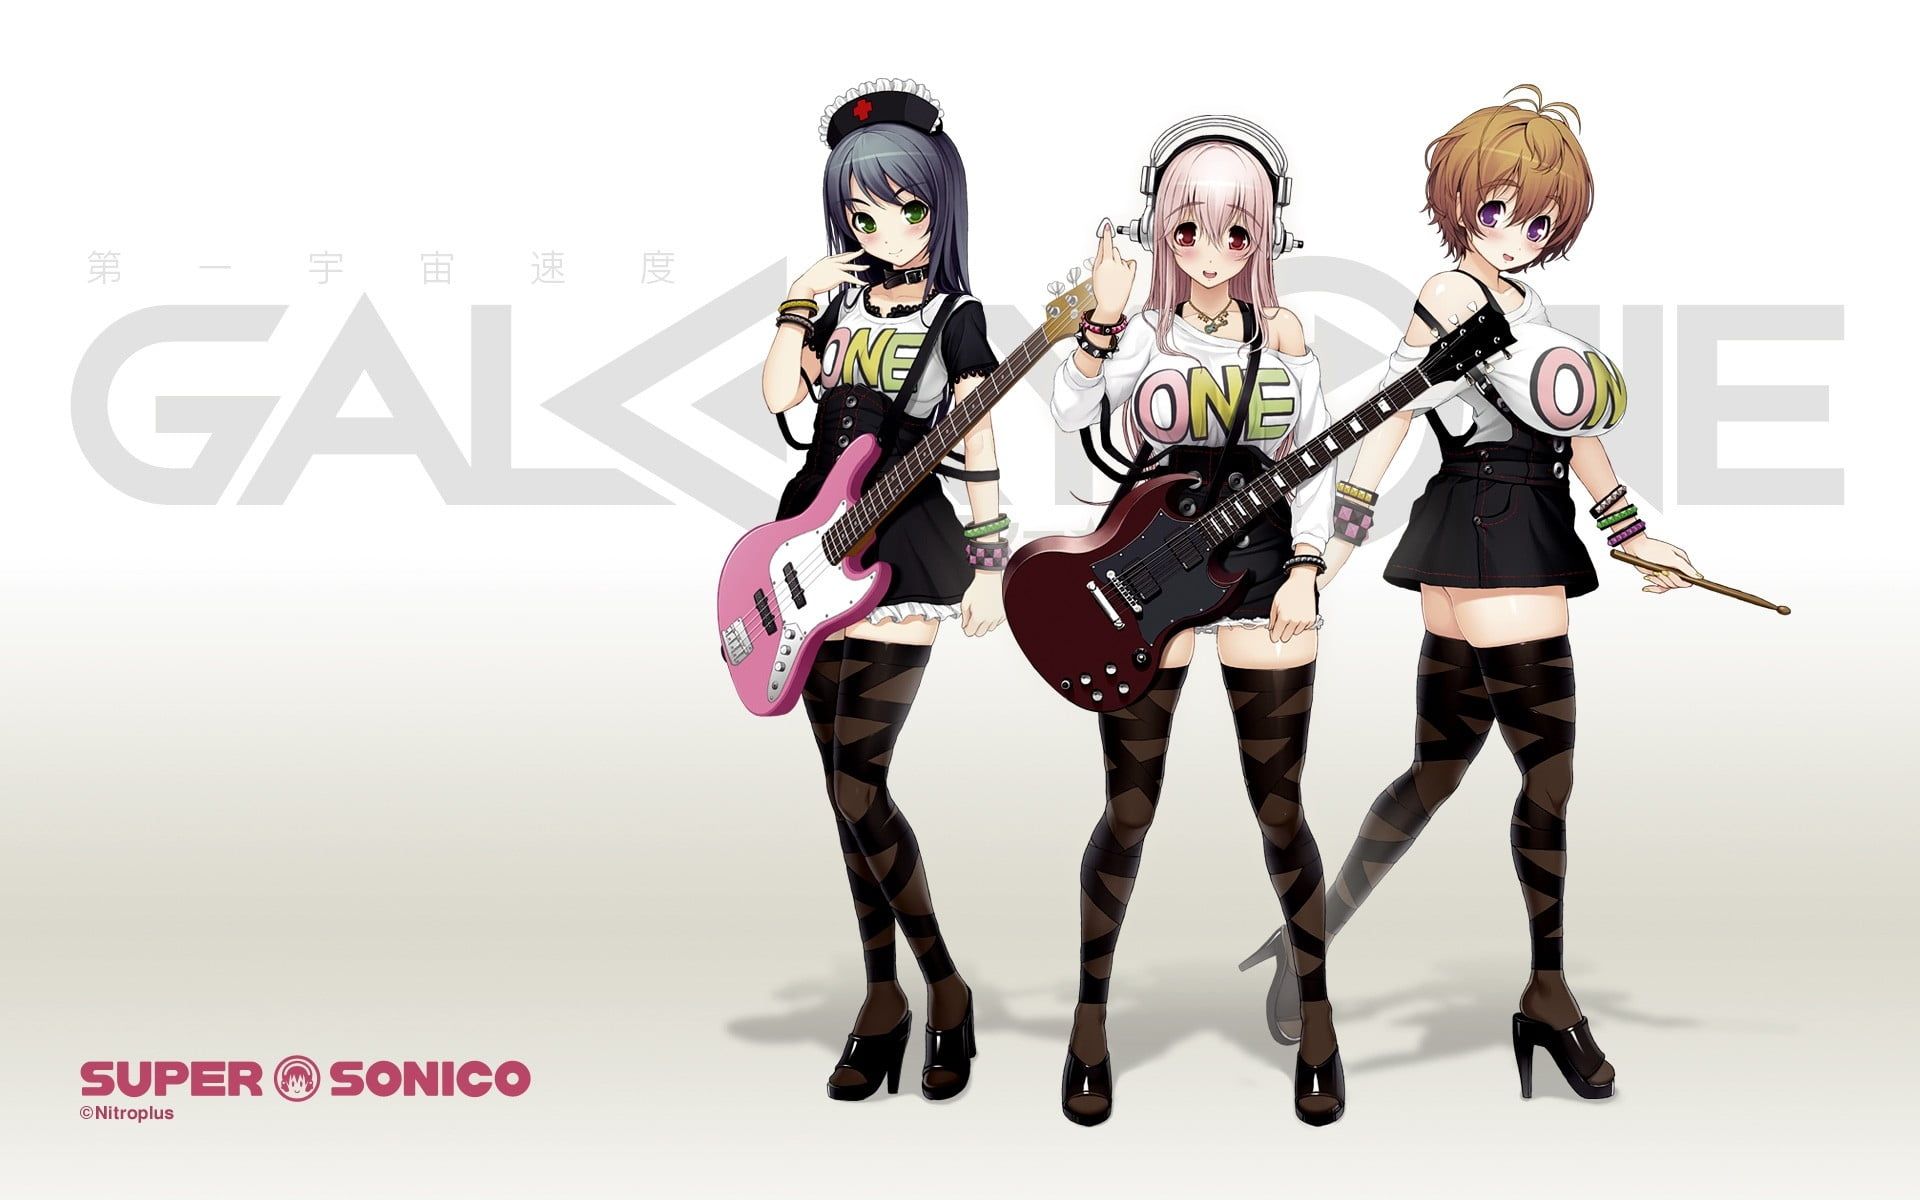 Three woman anime characters carrying electric guitars and drums